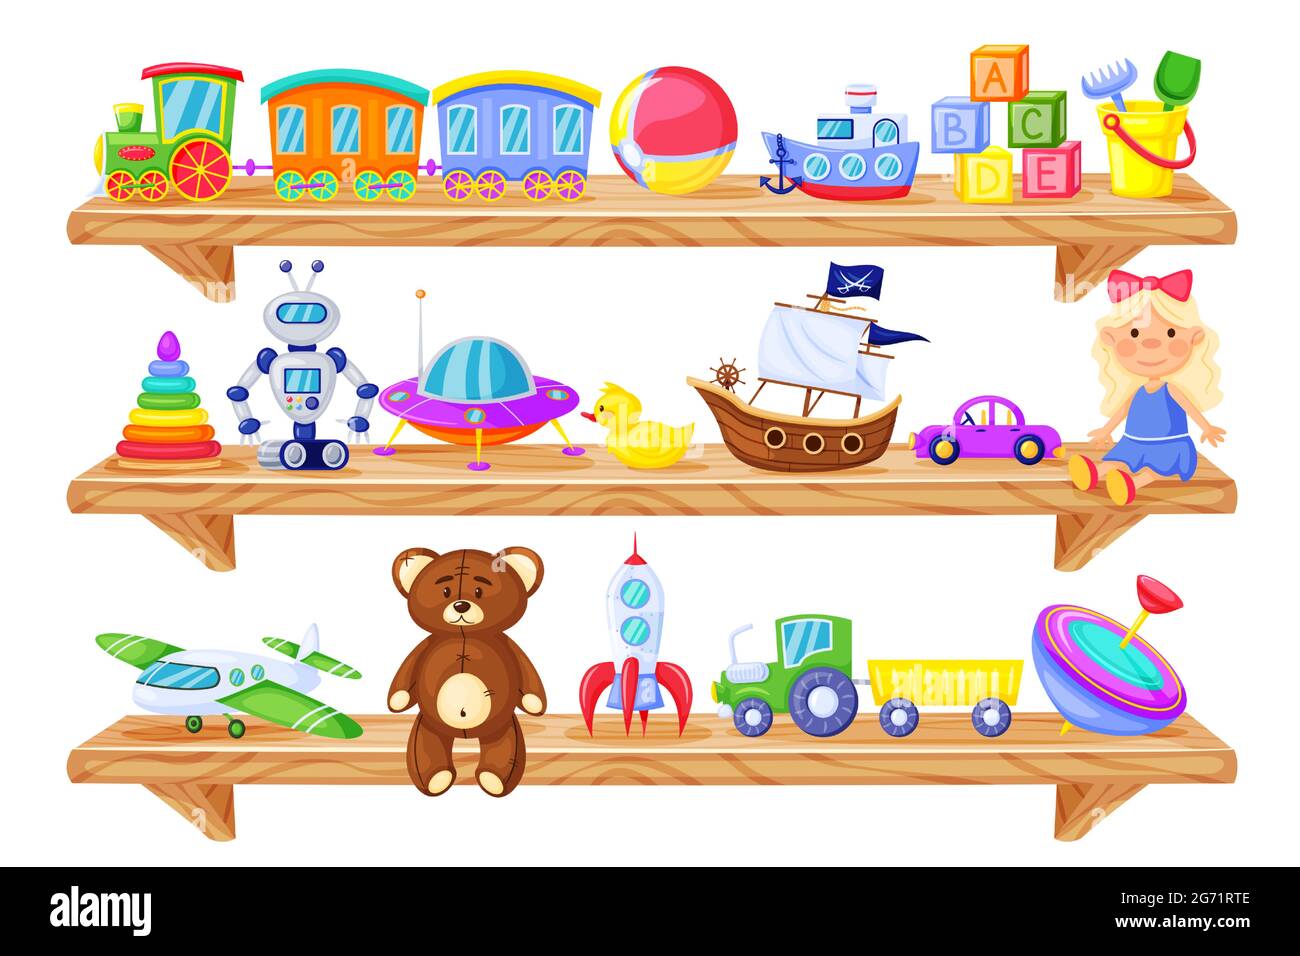 Toys on shelves. Cartoon wooden store shelf with kids toys baby doll, train, robot, teddy bear, rocket. Children plastic toy vector set. Nursery room with colorful objects for child game Stock Vector